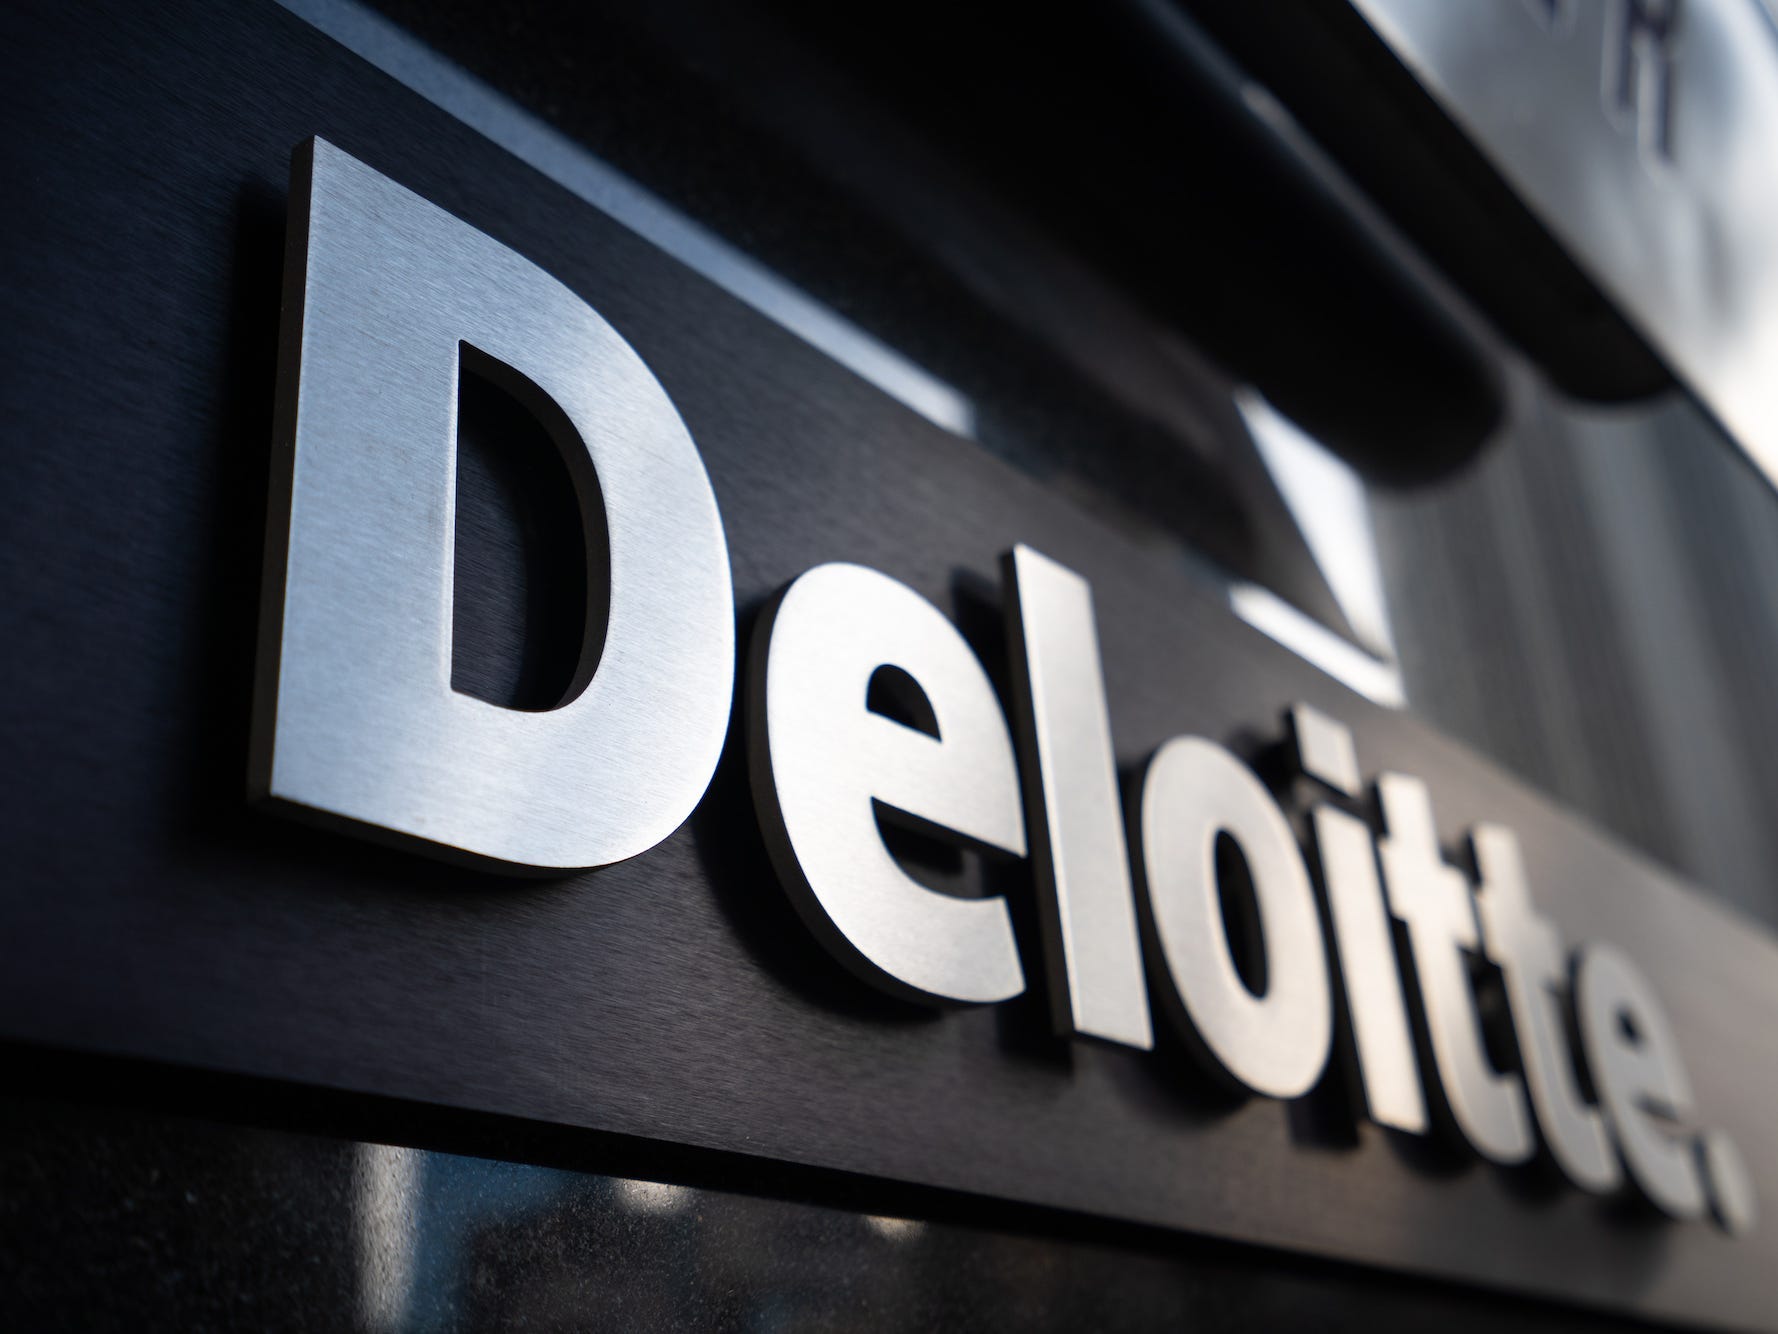 <p>Deloitte announced on April 21 it was cutting 1,200 jobs, or about 1.5% of its US staff, <a href="https://www.ft.com/content/b0580bfc-c053-49ad-ac89-5fc8ab379d26">the Financial Times reported</a>. </p><p>The cuts will largely be concentrated in the financial advisory business as a result of a decline in mergers and acquisitions, per internal communications viewed by the FT. </p>